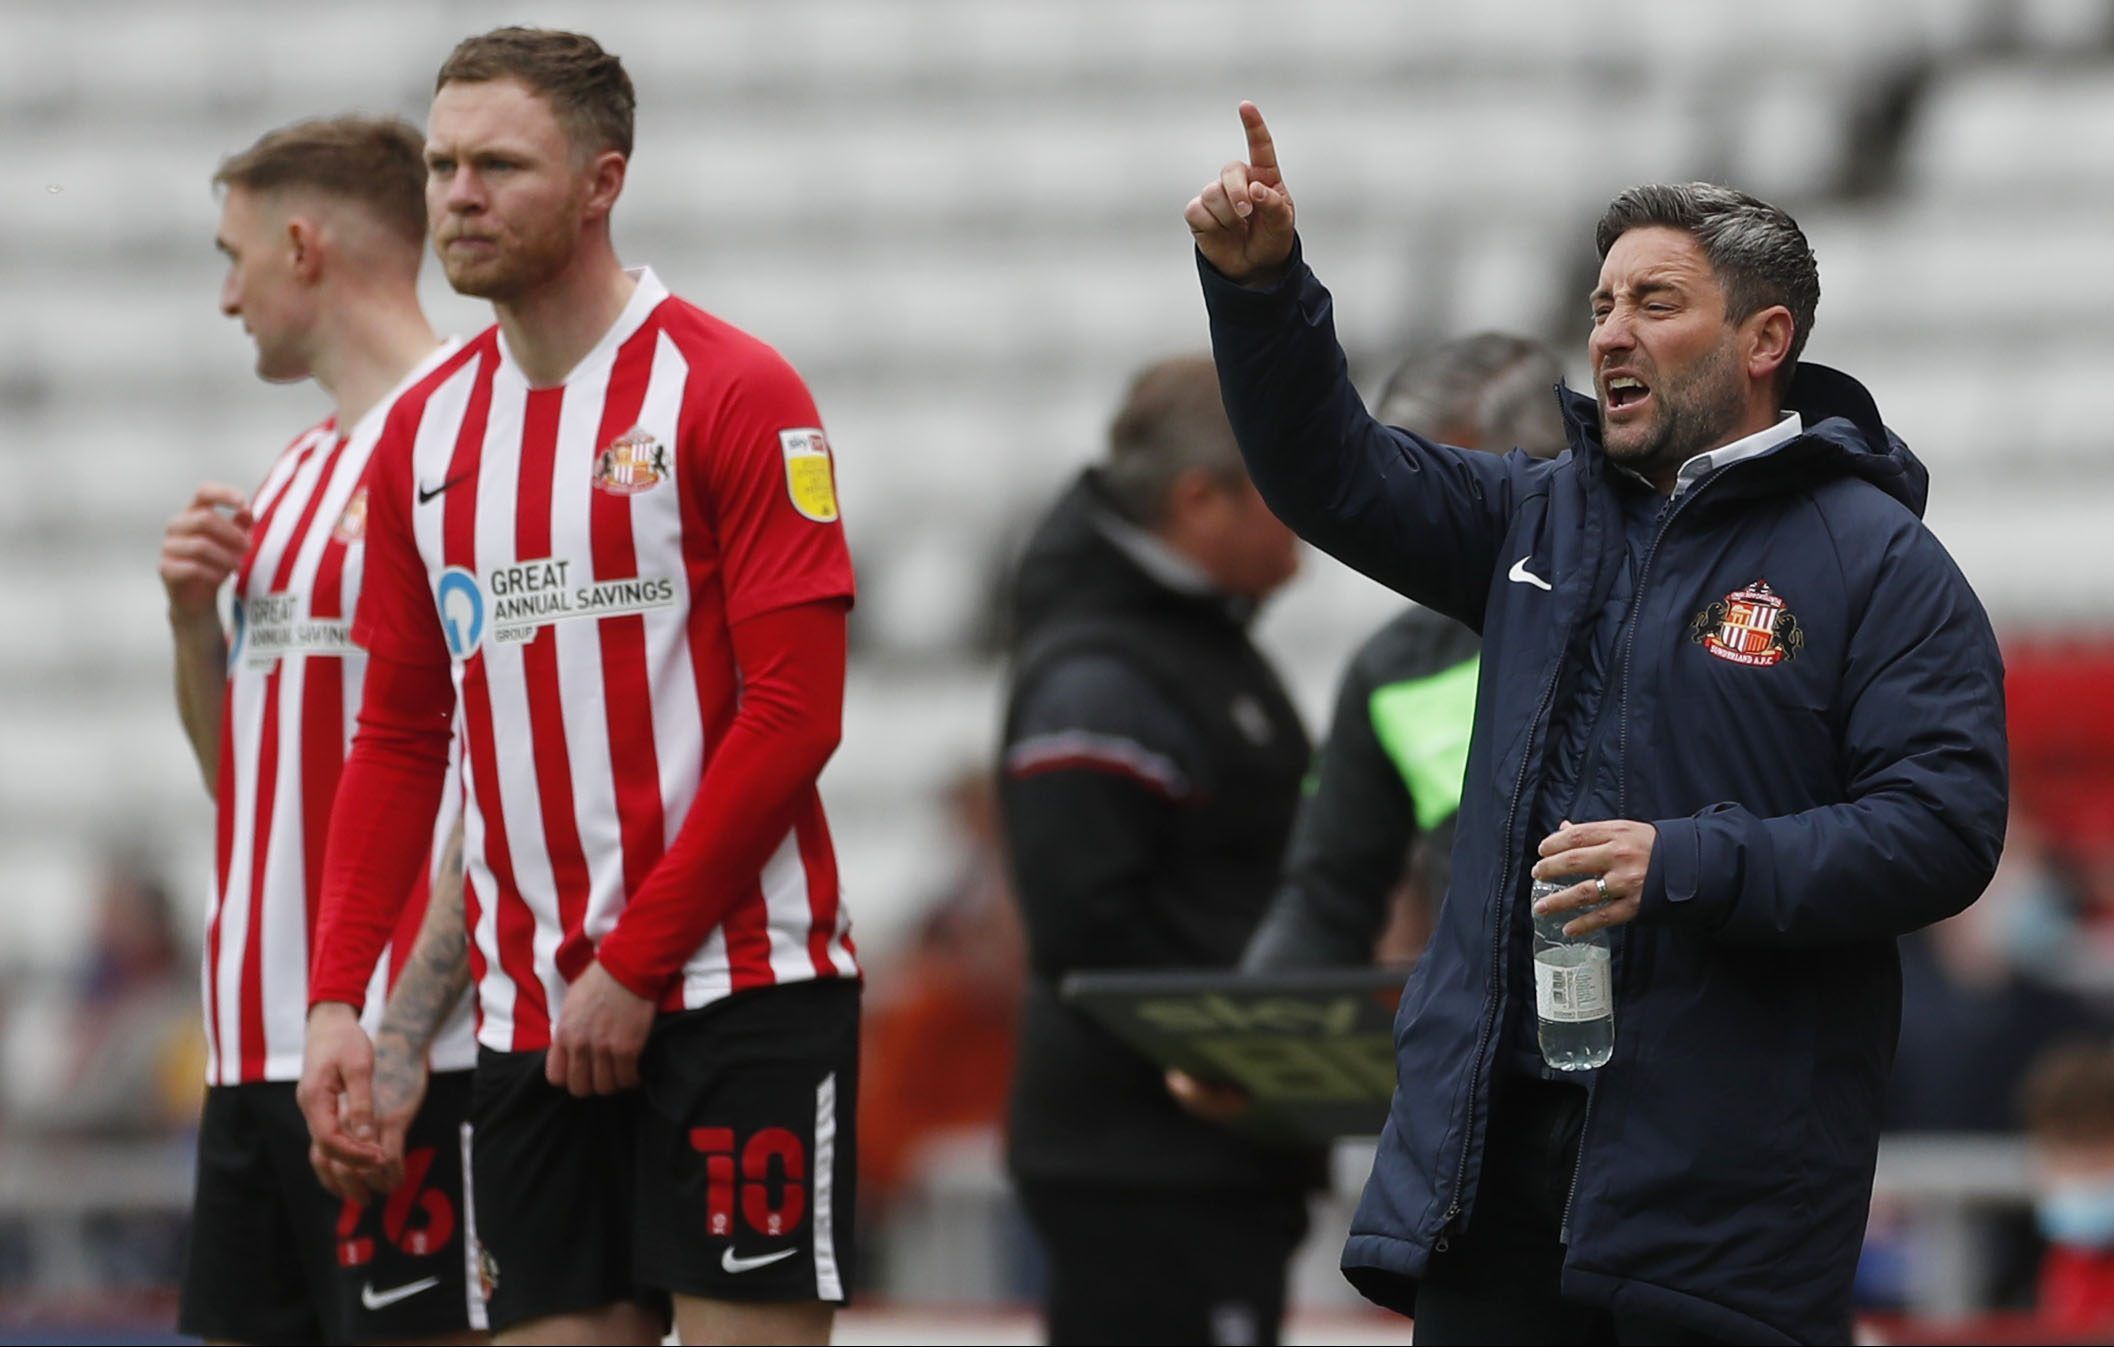 Soccer Football - League One Play-Off Semi Final Second Leg - Sunderland v Lincoln City - Stadium of Light, Sunderland, Britain - May 22, 2021  Sunderland's manager Lee Johnson reacts as Carl Winchester and Aiden O'Brien get ready to come on as substitutes Action Images/Lee Smith EDITORIAL USE ONLY. No use with unauthorized audio, video, data, fixture lists, club/league logos or 'live' services. Online in-match use limited to 75 images, no video emulation. No use in betting, games or single club